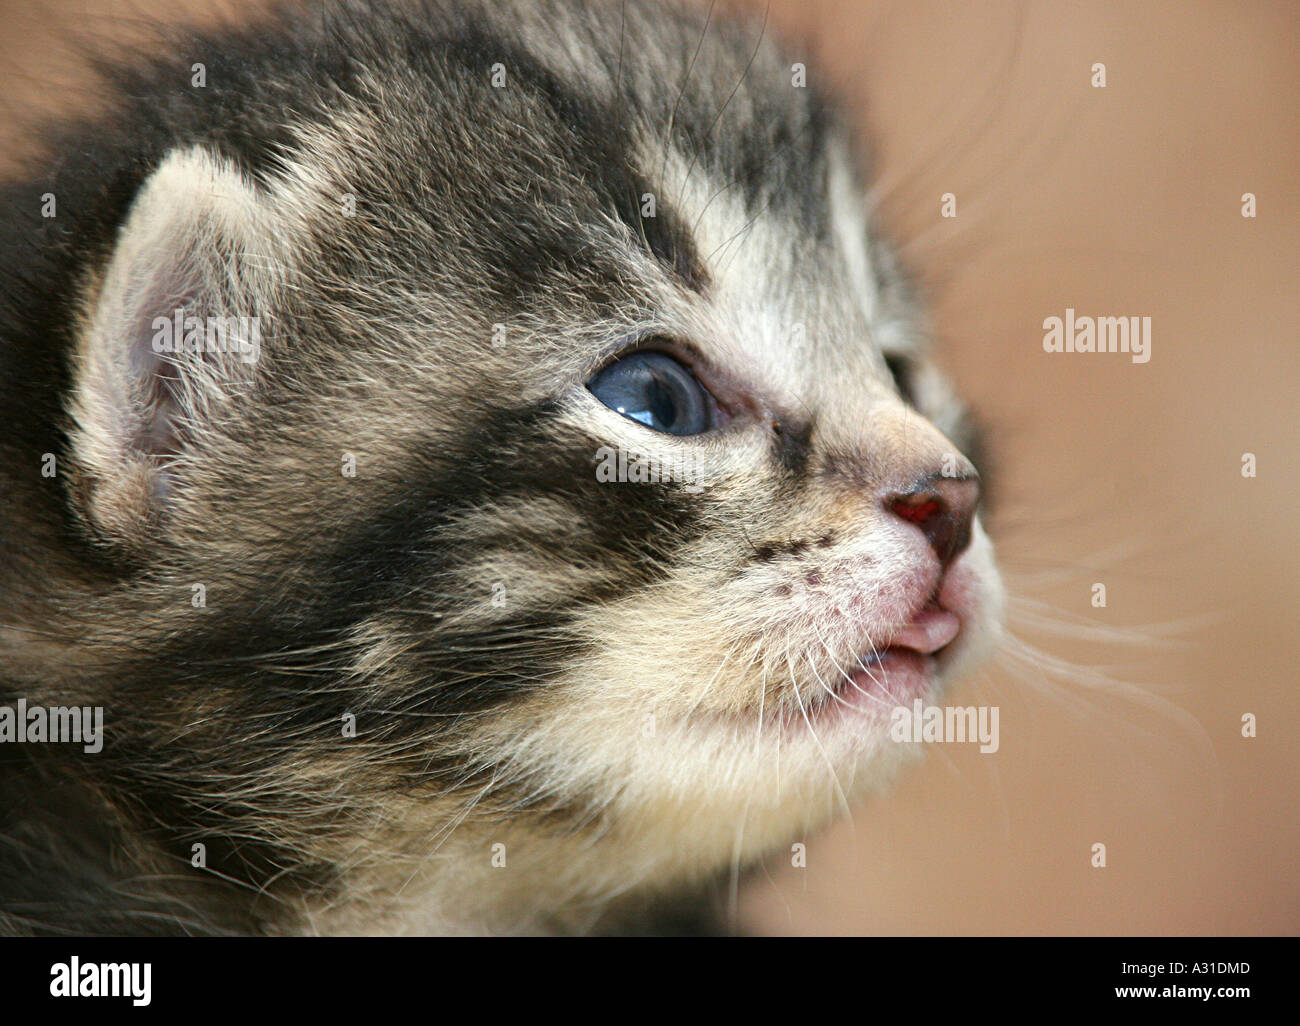 Close up of a gray eyed young cat Stock Photo